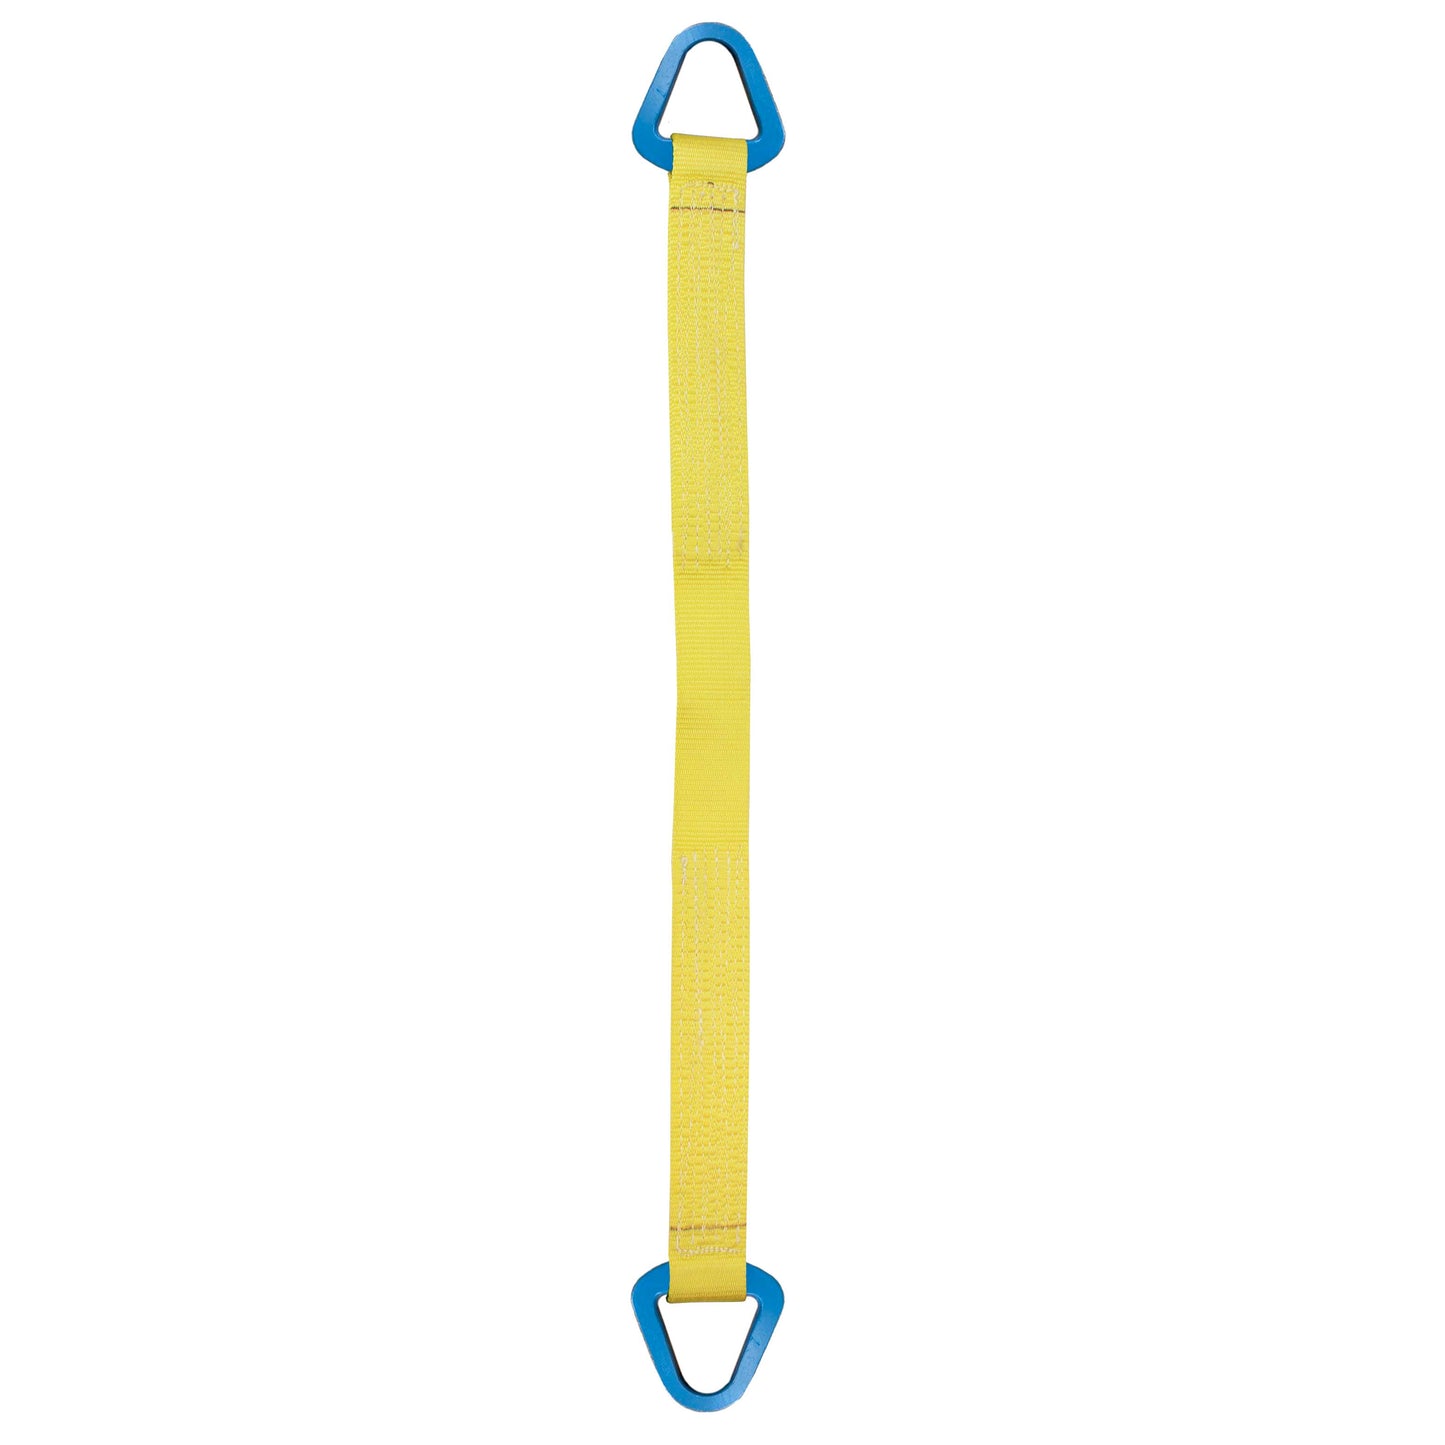 Nylon Lifting Sling Triangle 6 inch x 12 foot 1ply image 1 of 2